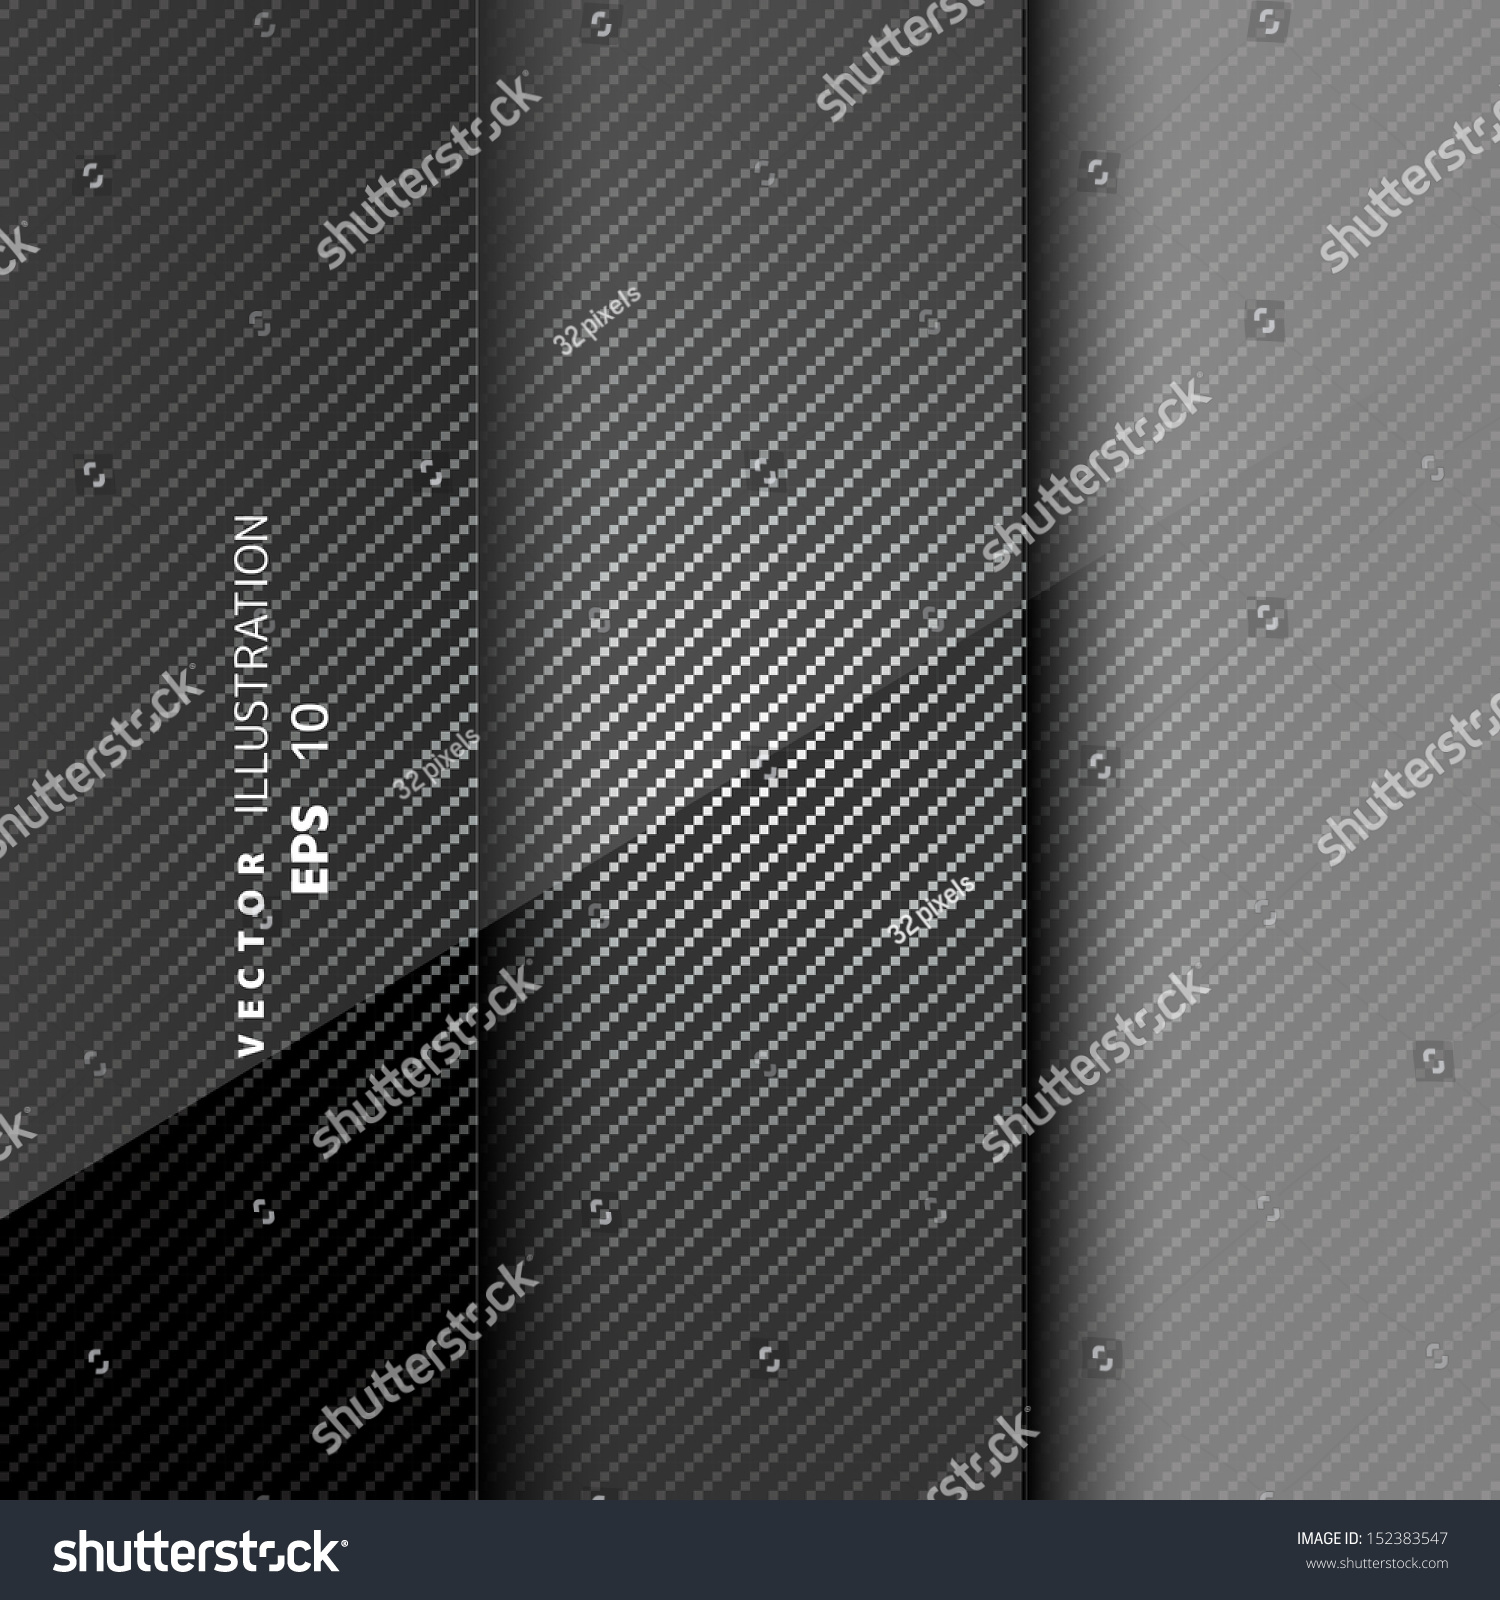 SVG of Metallic background with carbon texture svg